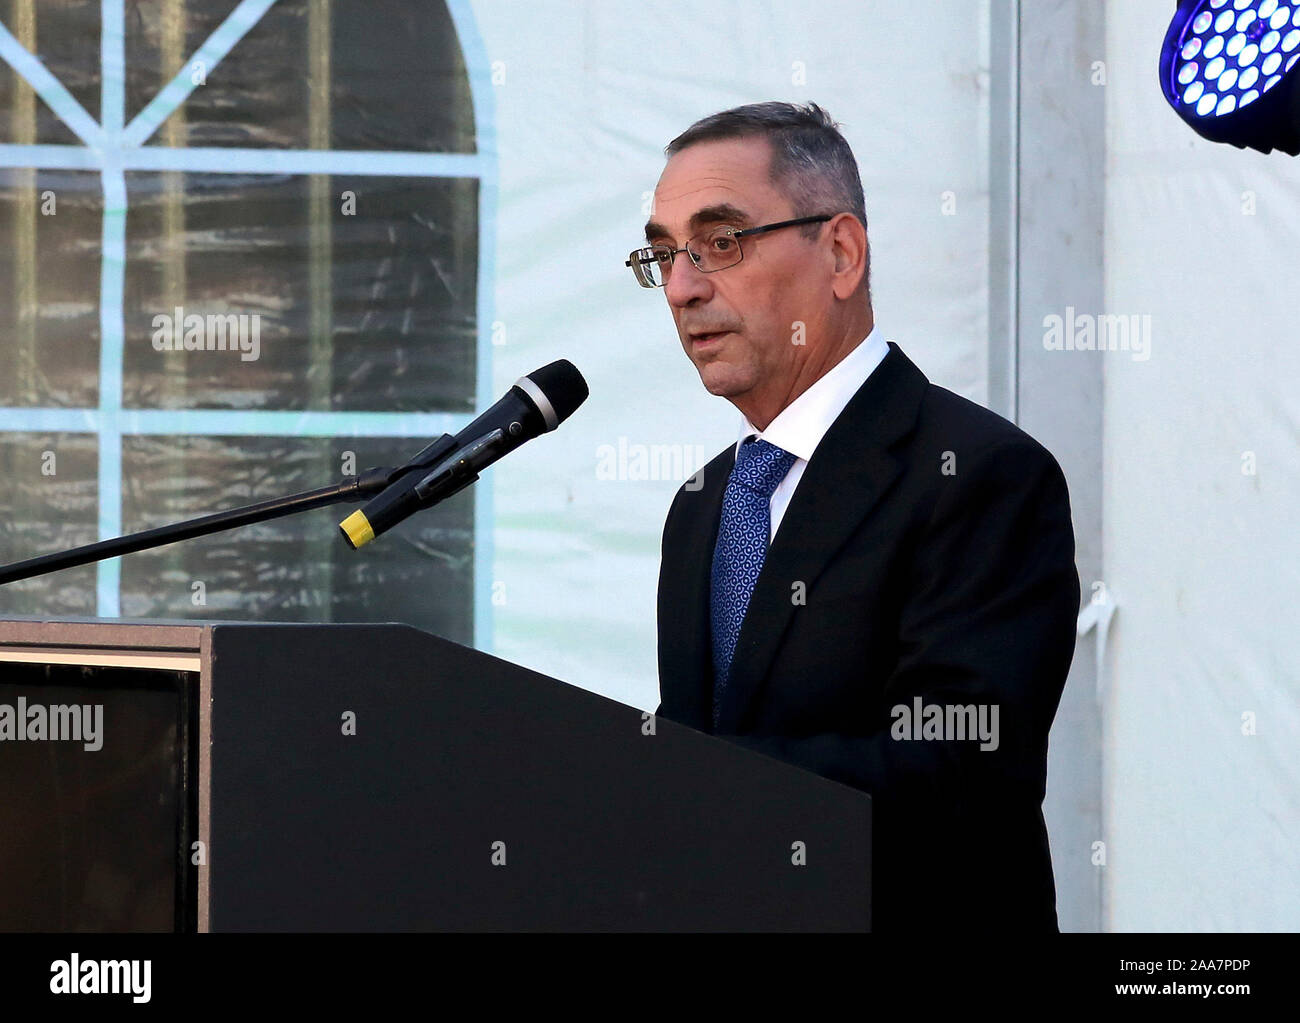 Bar/Ulcinj. 20th Nov, 2019. Joe Mizzi, Malta's Minister for Energy and Water Management, gives a speech at the inauguration ceremony of the Mozura Wind Park in southern Montenegro on Nov. 18, 2019. Credit: Shi Zhongyu/Xinhua/Alamy Live News Stock Photo